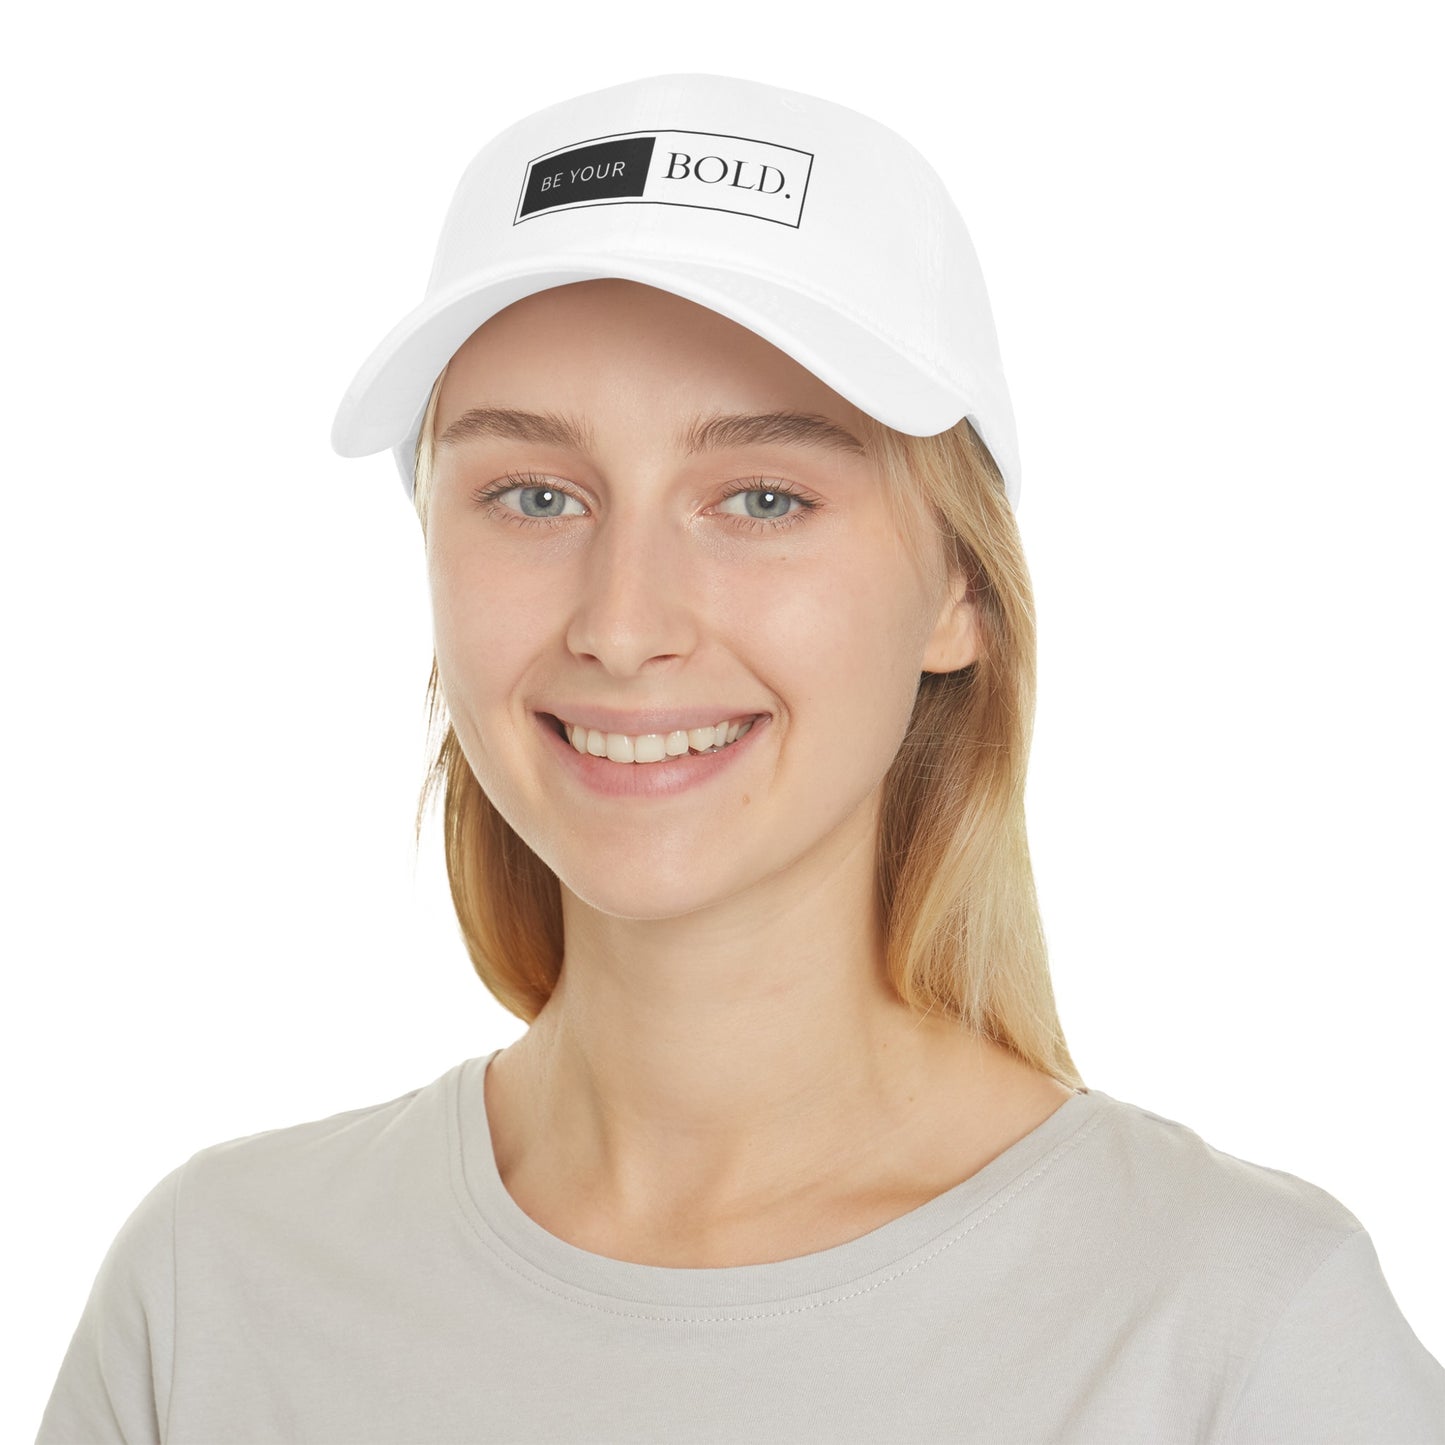 Be your Bold (1) Low Profile Baseball Cap